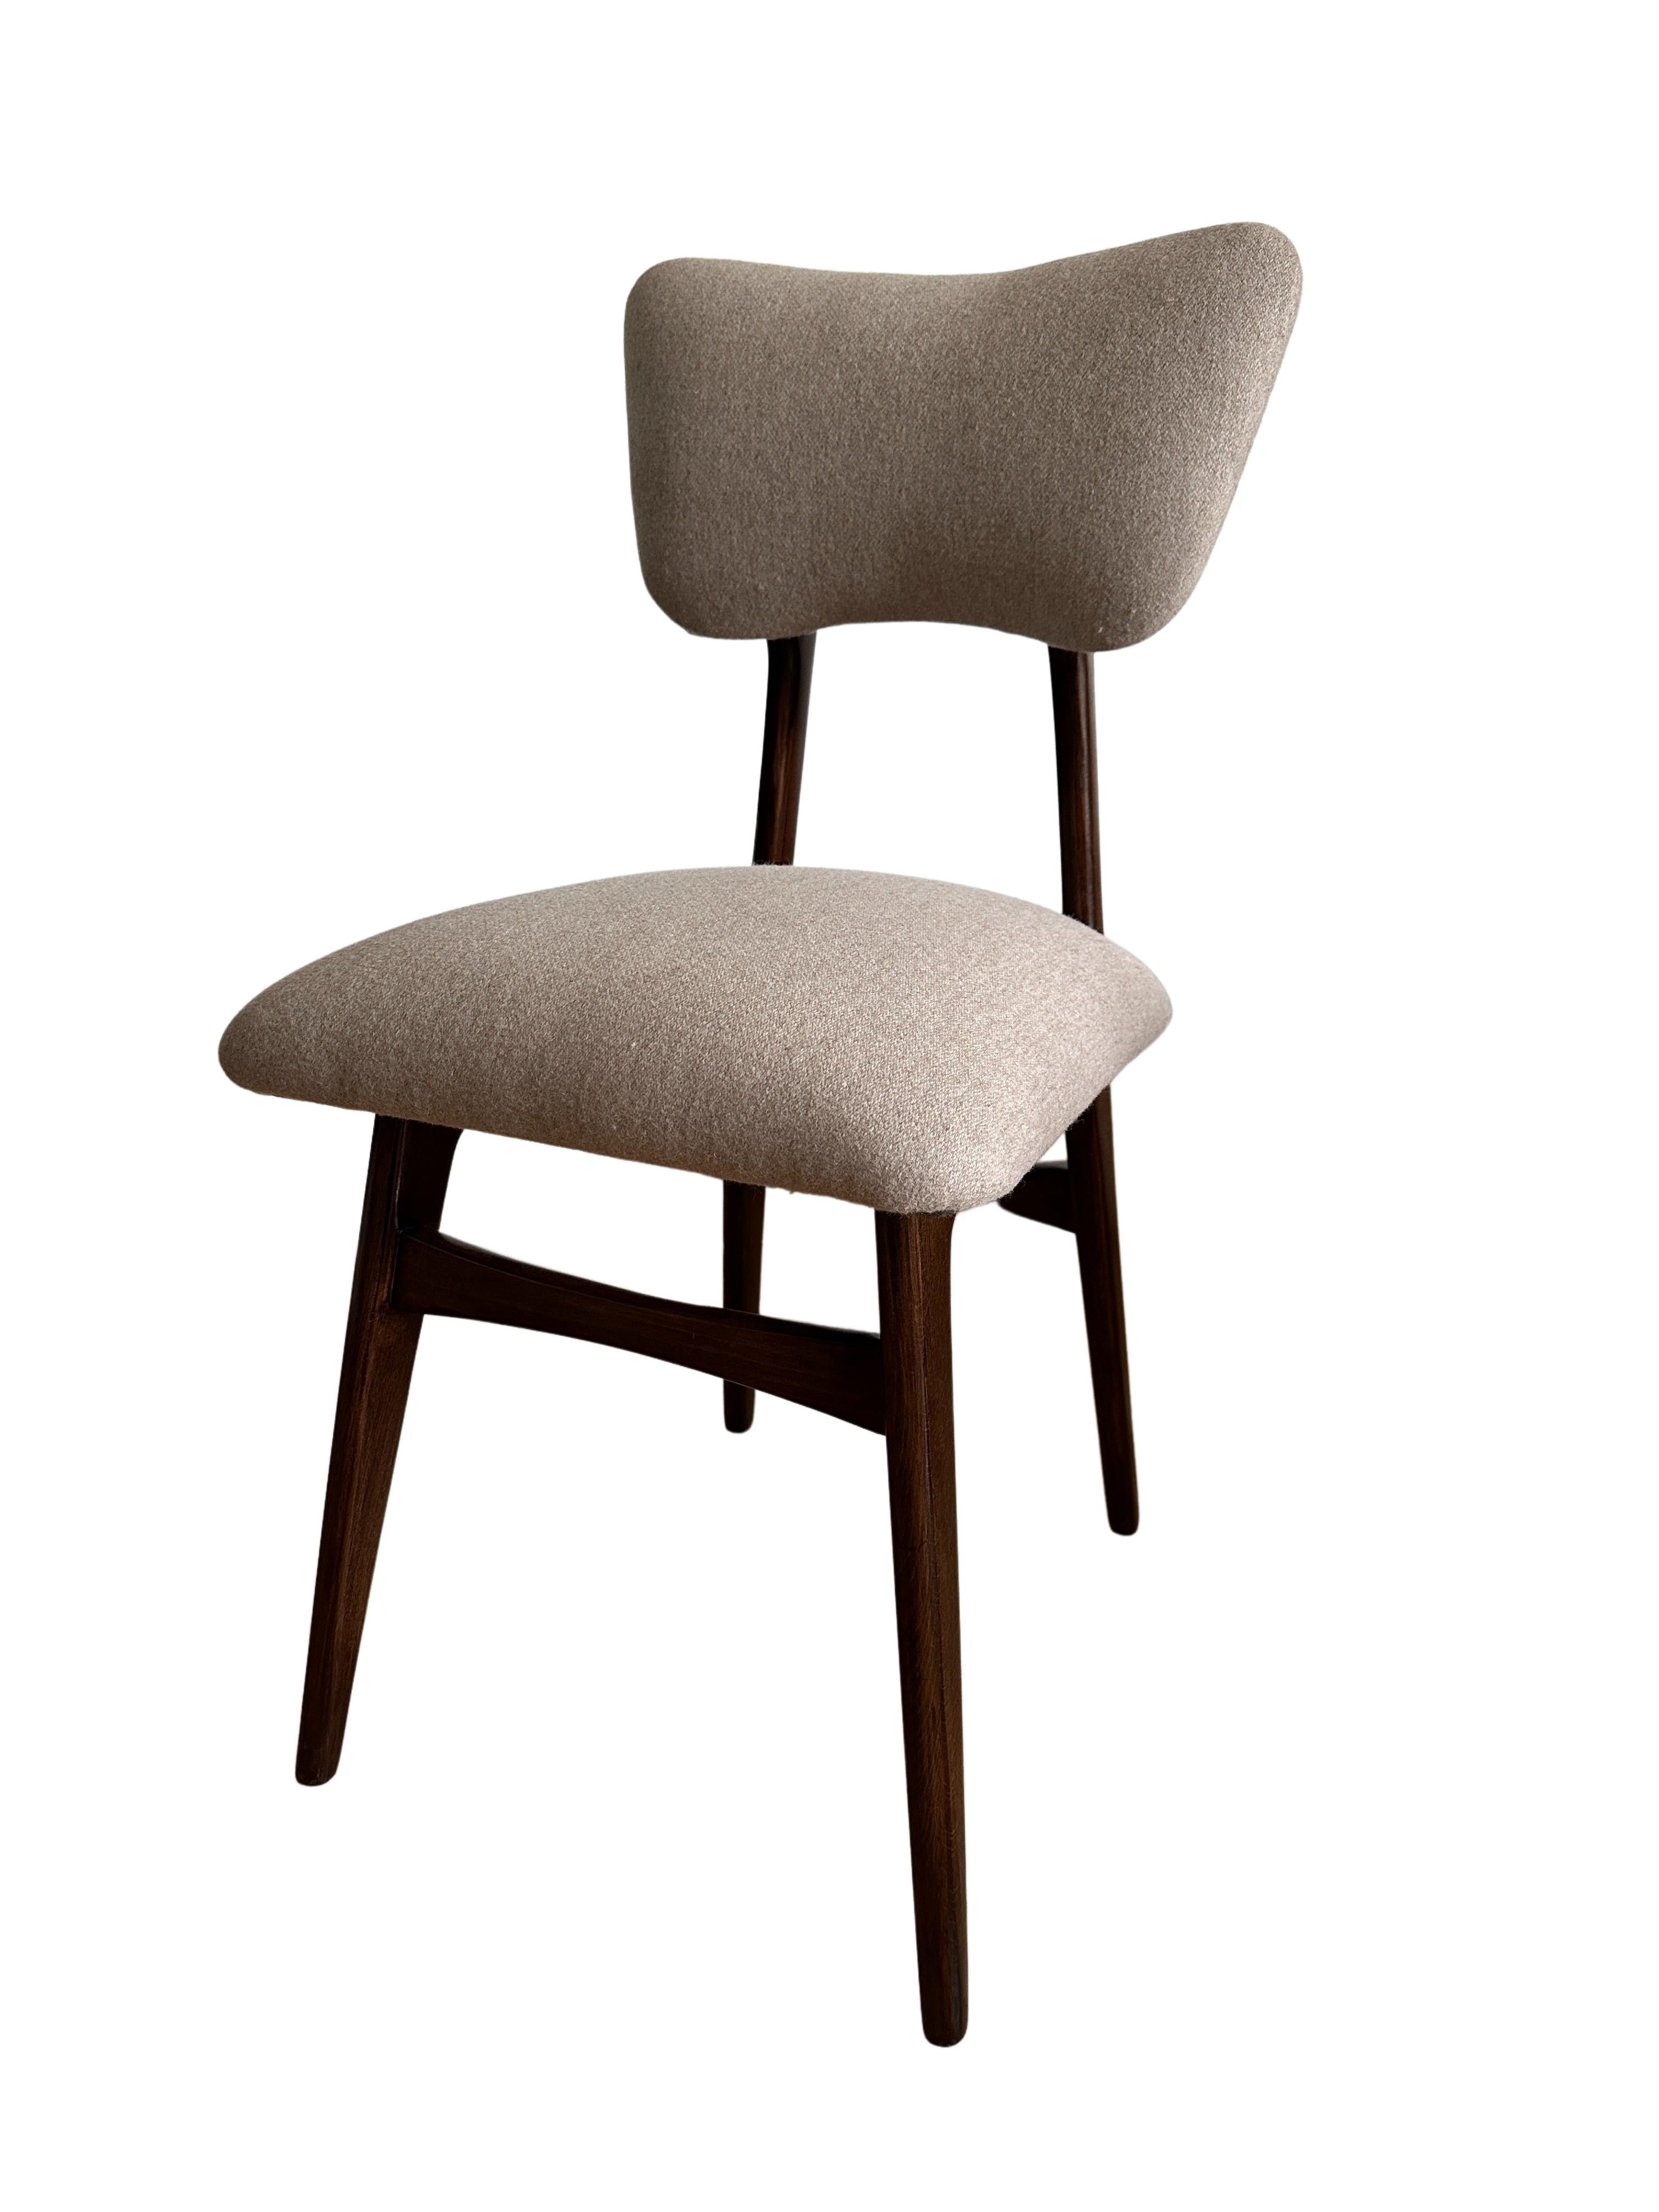 Bouclé Set of 4 Midcentury Dining Chairs in Beige Wool Upholstery, Poland, 1960s For Sale